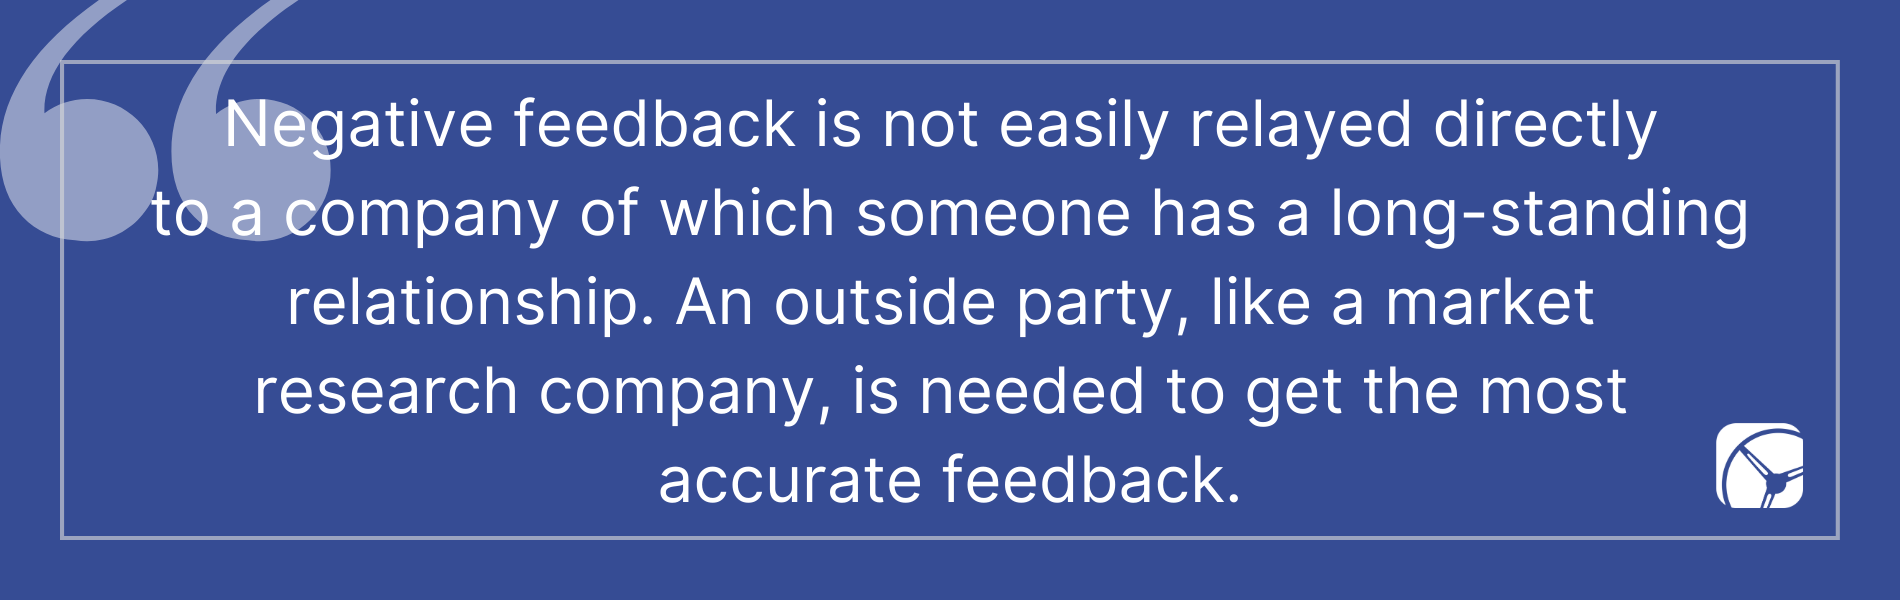 Negative feedback is not easily relayed directly  to a company of which someone has a long-standing relationship. An outside party, like a market  research company, is needed to get the most  accurate feedback.